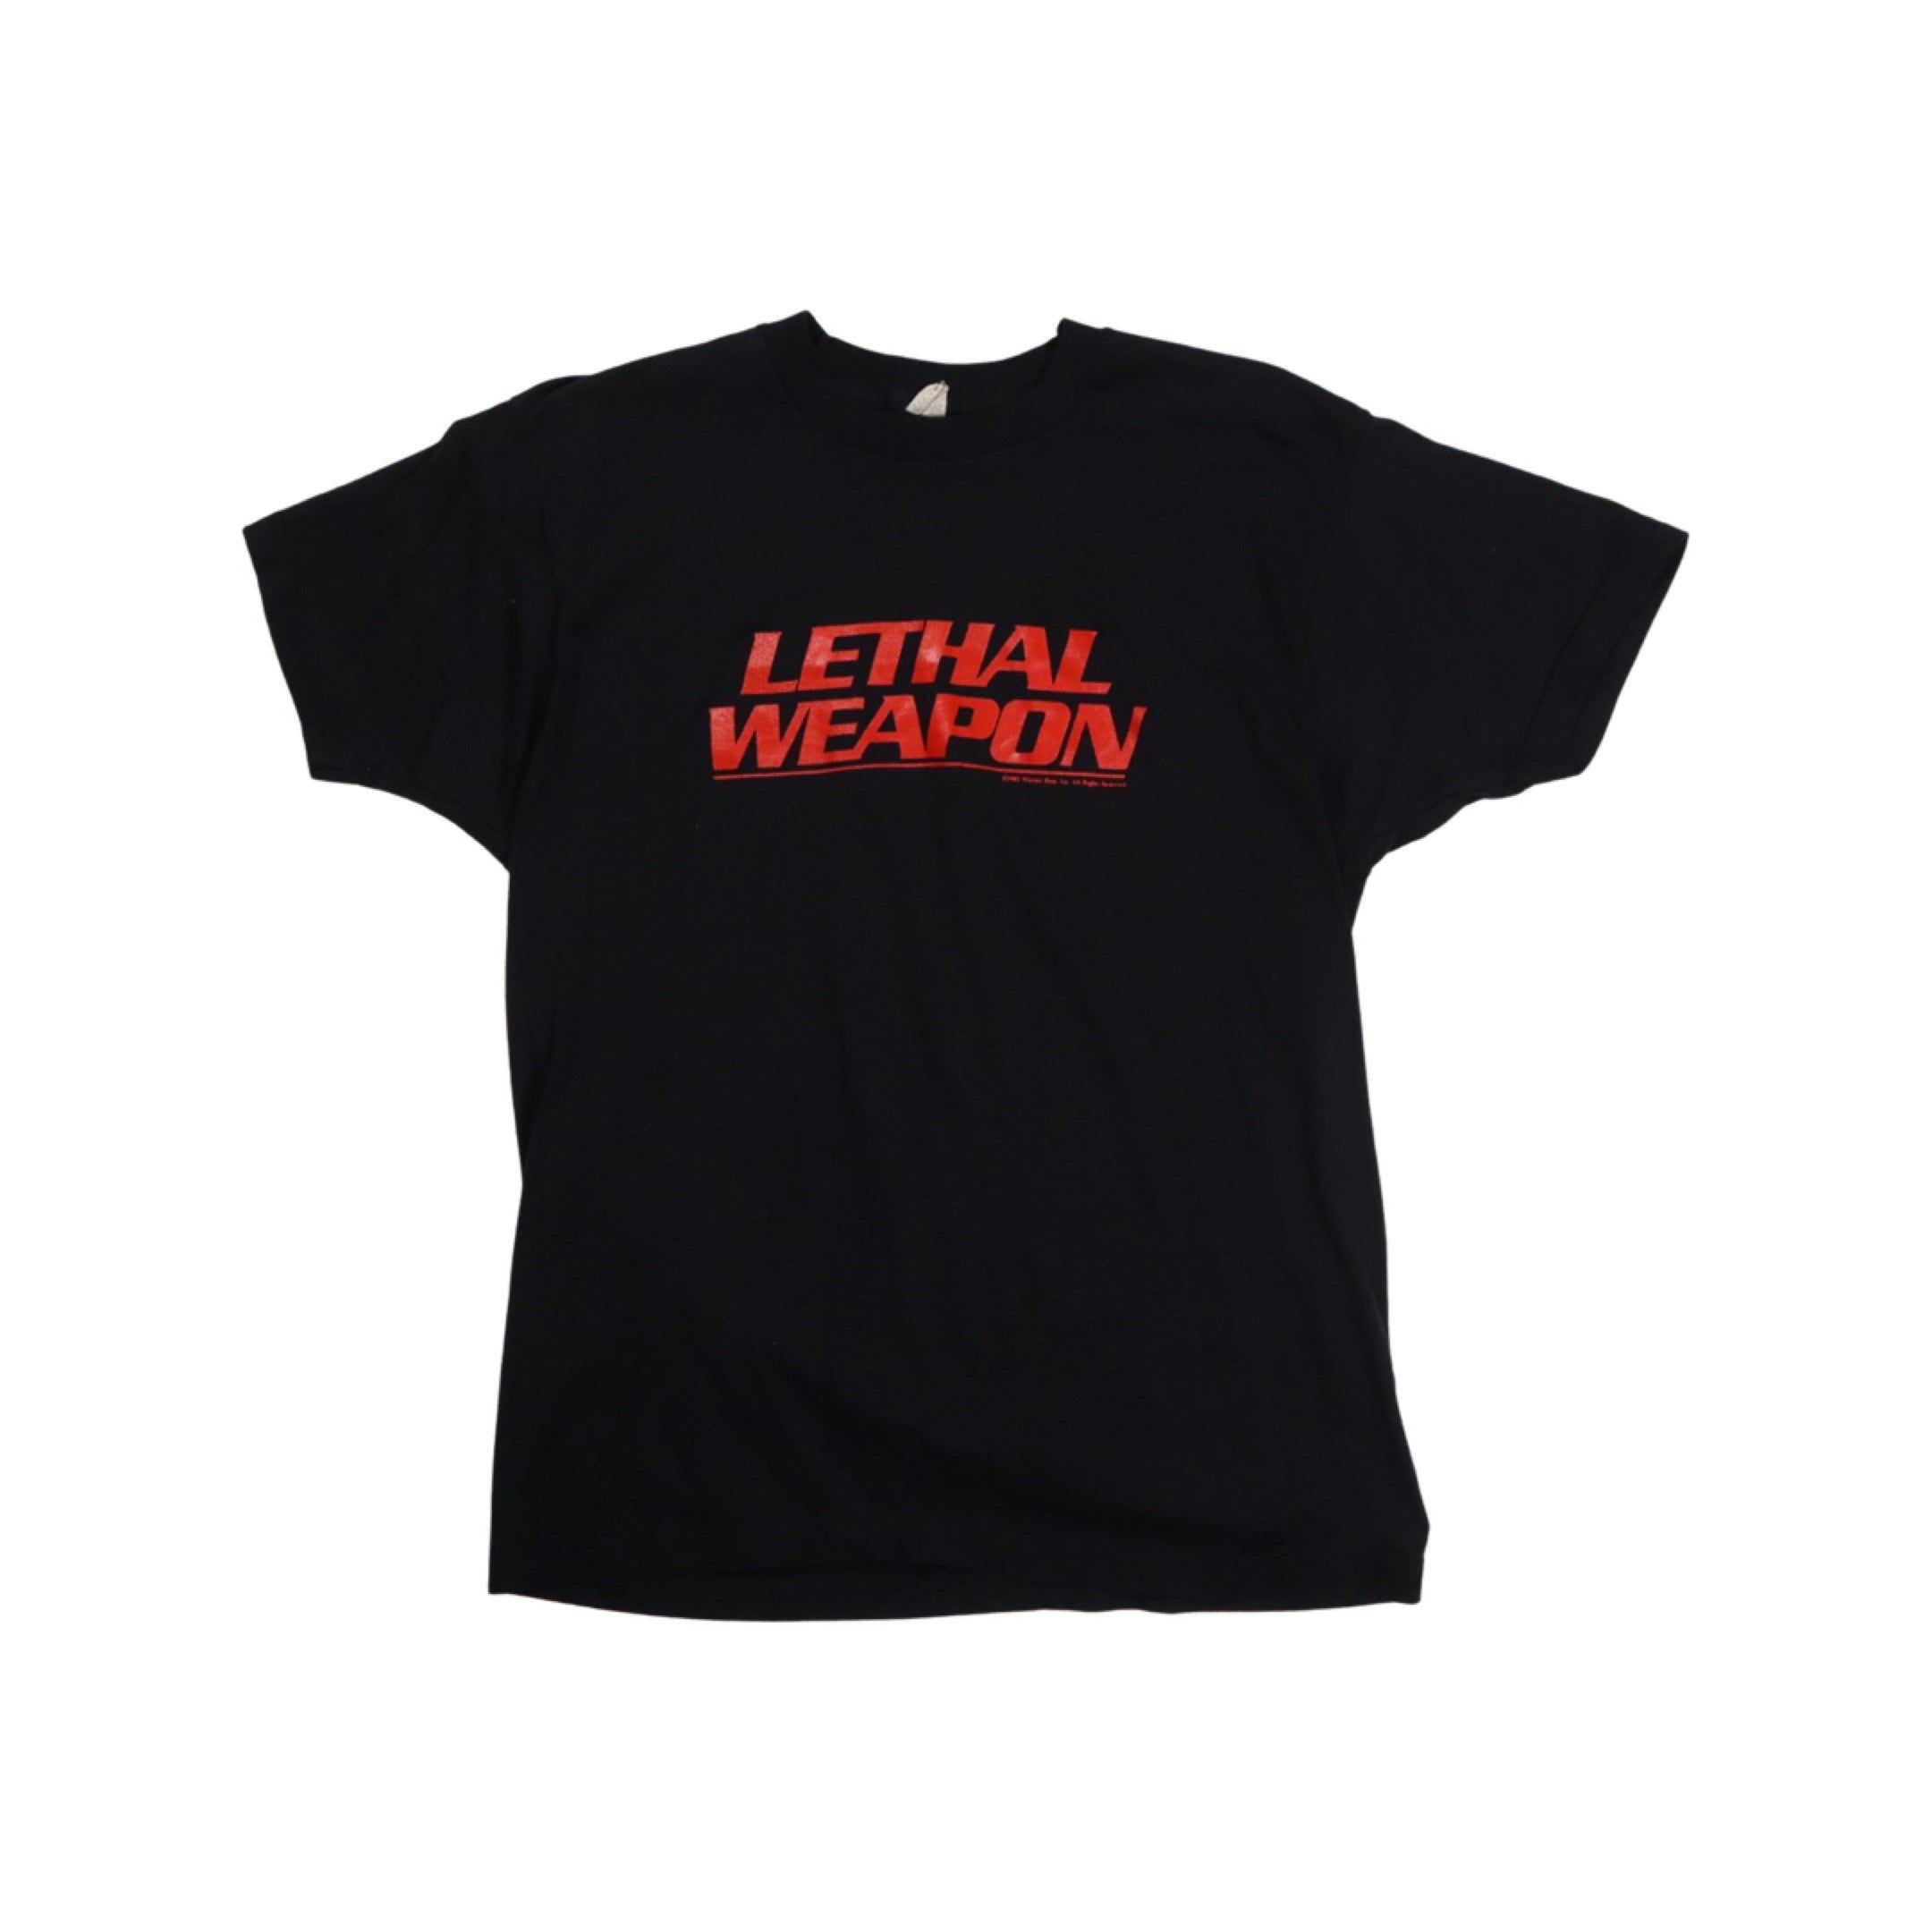 Lethal Weapon 1987 T-Shirt Grail (Large)